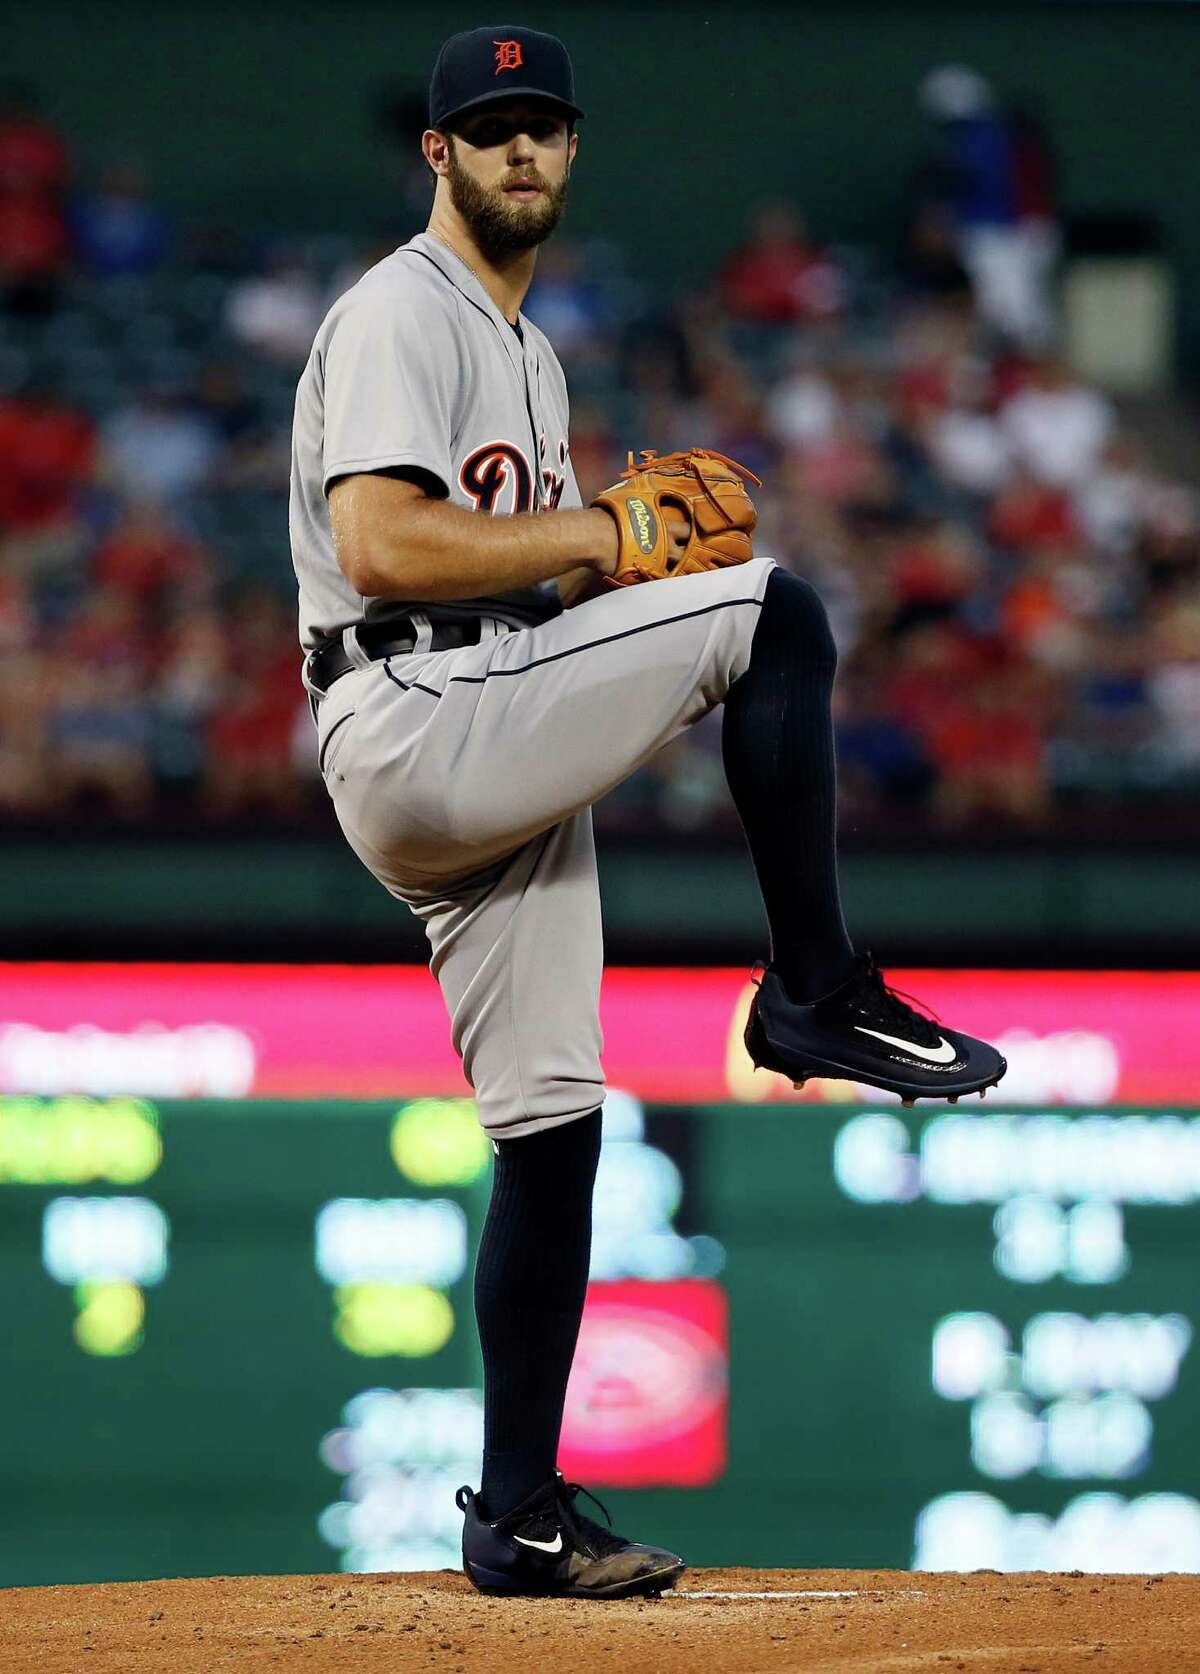 Detroit Tigers starting pitcher Daniel Norris (44) winds up to deliver to the Texas Rangers in a baseball game Tuesday, Sept. 29, 2015, in Arlington, Texas. (AP Photo/Tony Gutierrez)